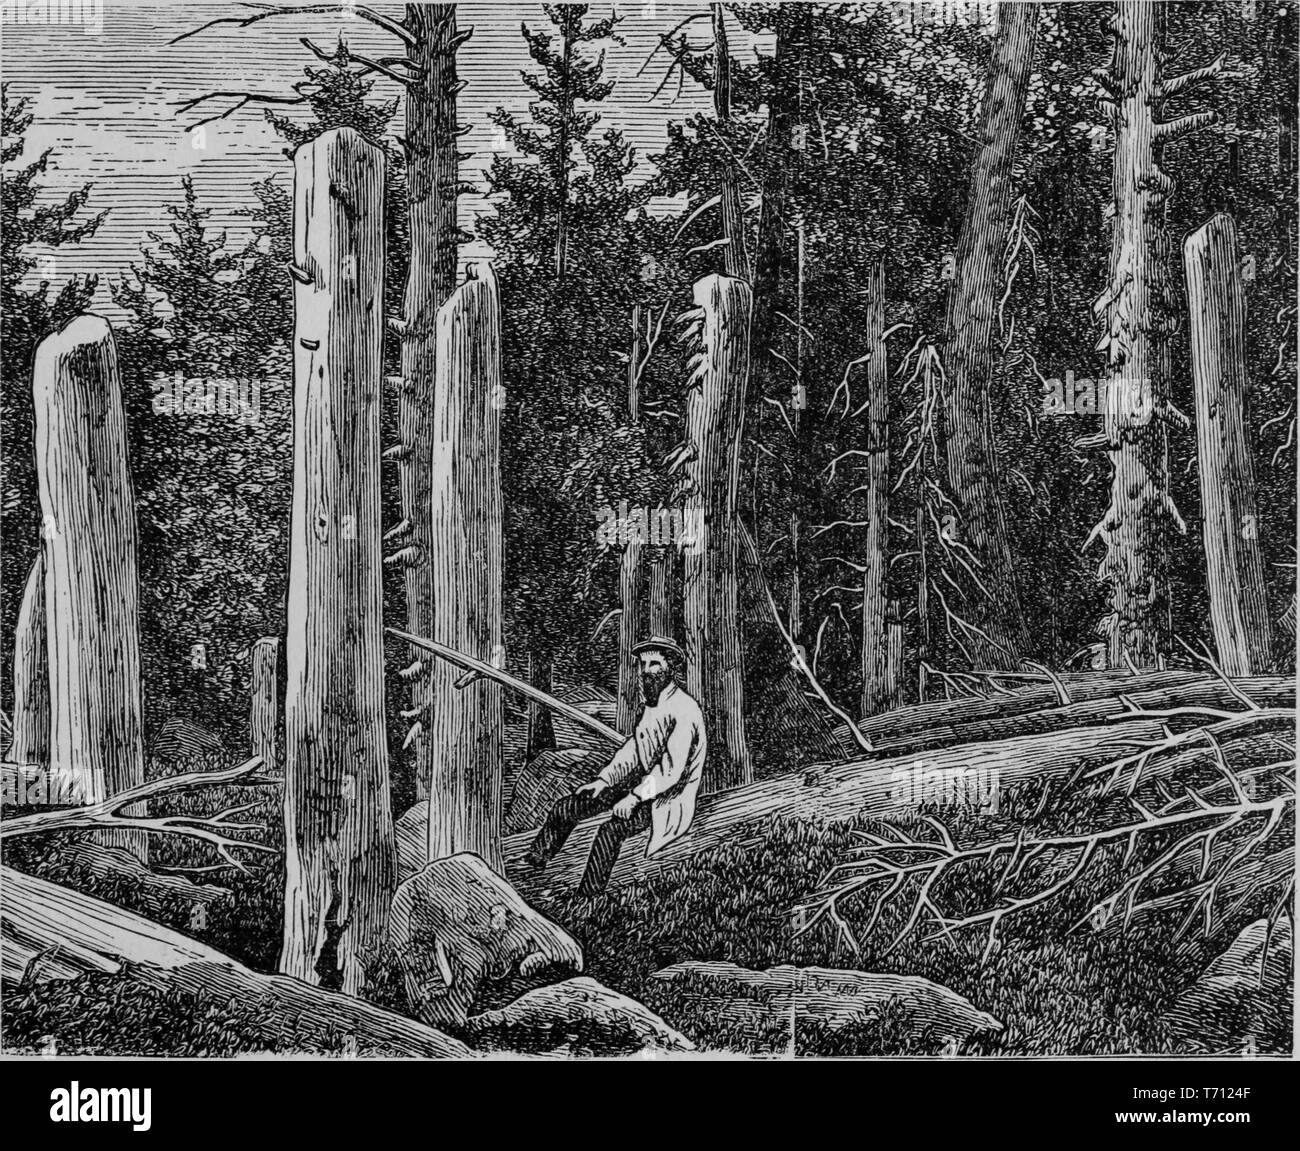 Engraving of a man resting in a forest, from the book 'Crofutt's new overland tourist and Pacific coast guide', Starvation Camp, Donner Lake, California, 1879. Courtesy Internet Archive. () Stock Photo